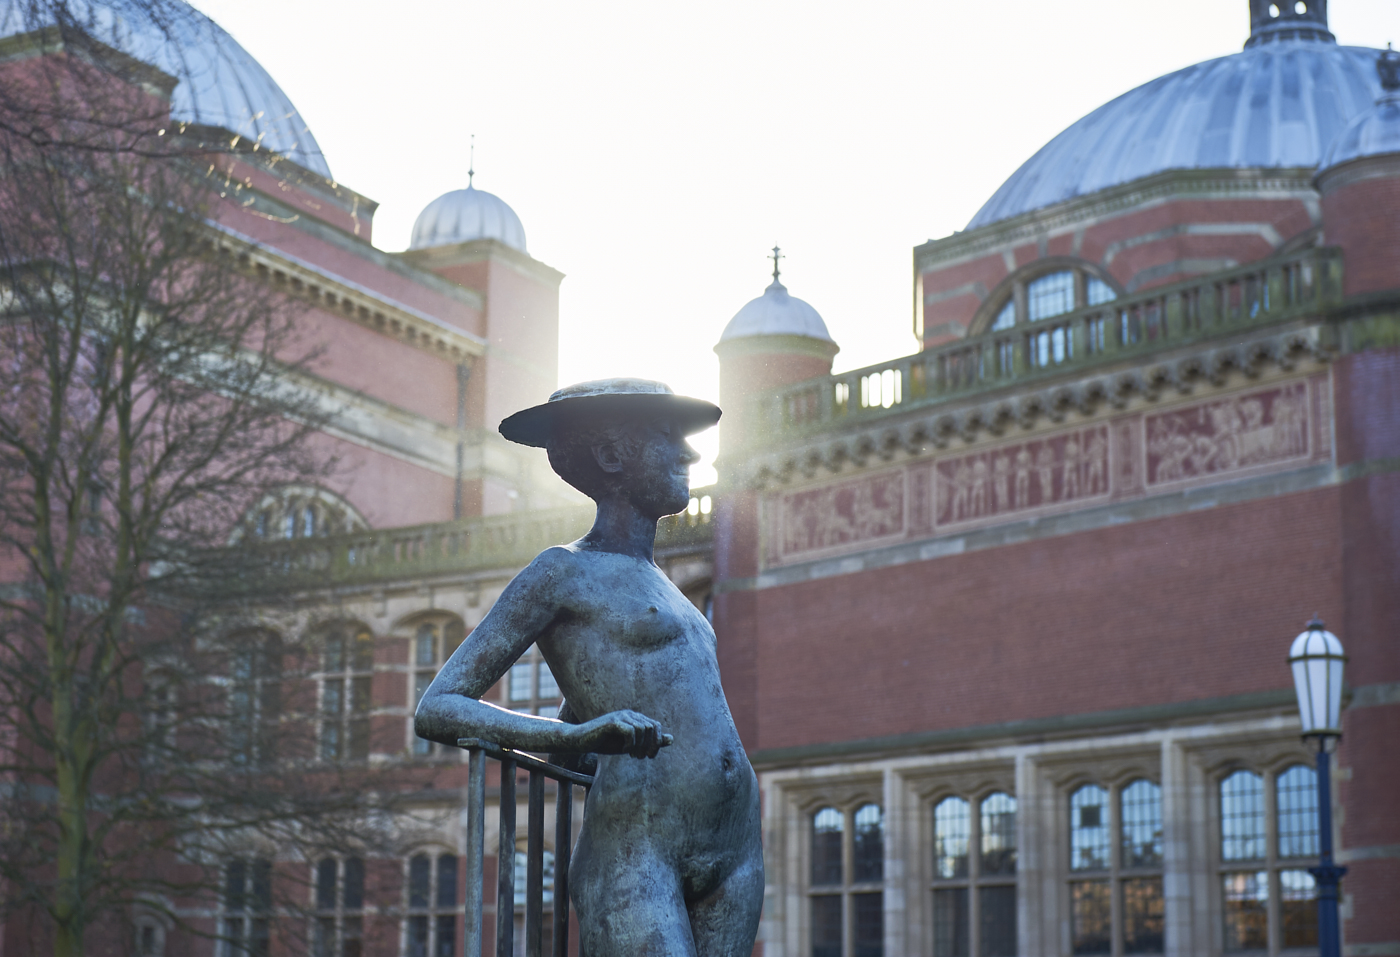 Profile of Girl in a Hat bronze scultpure by Bernard Sindall in context of Chancellor's Court